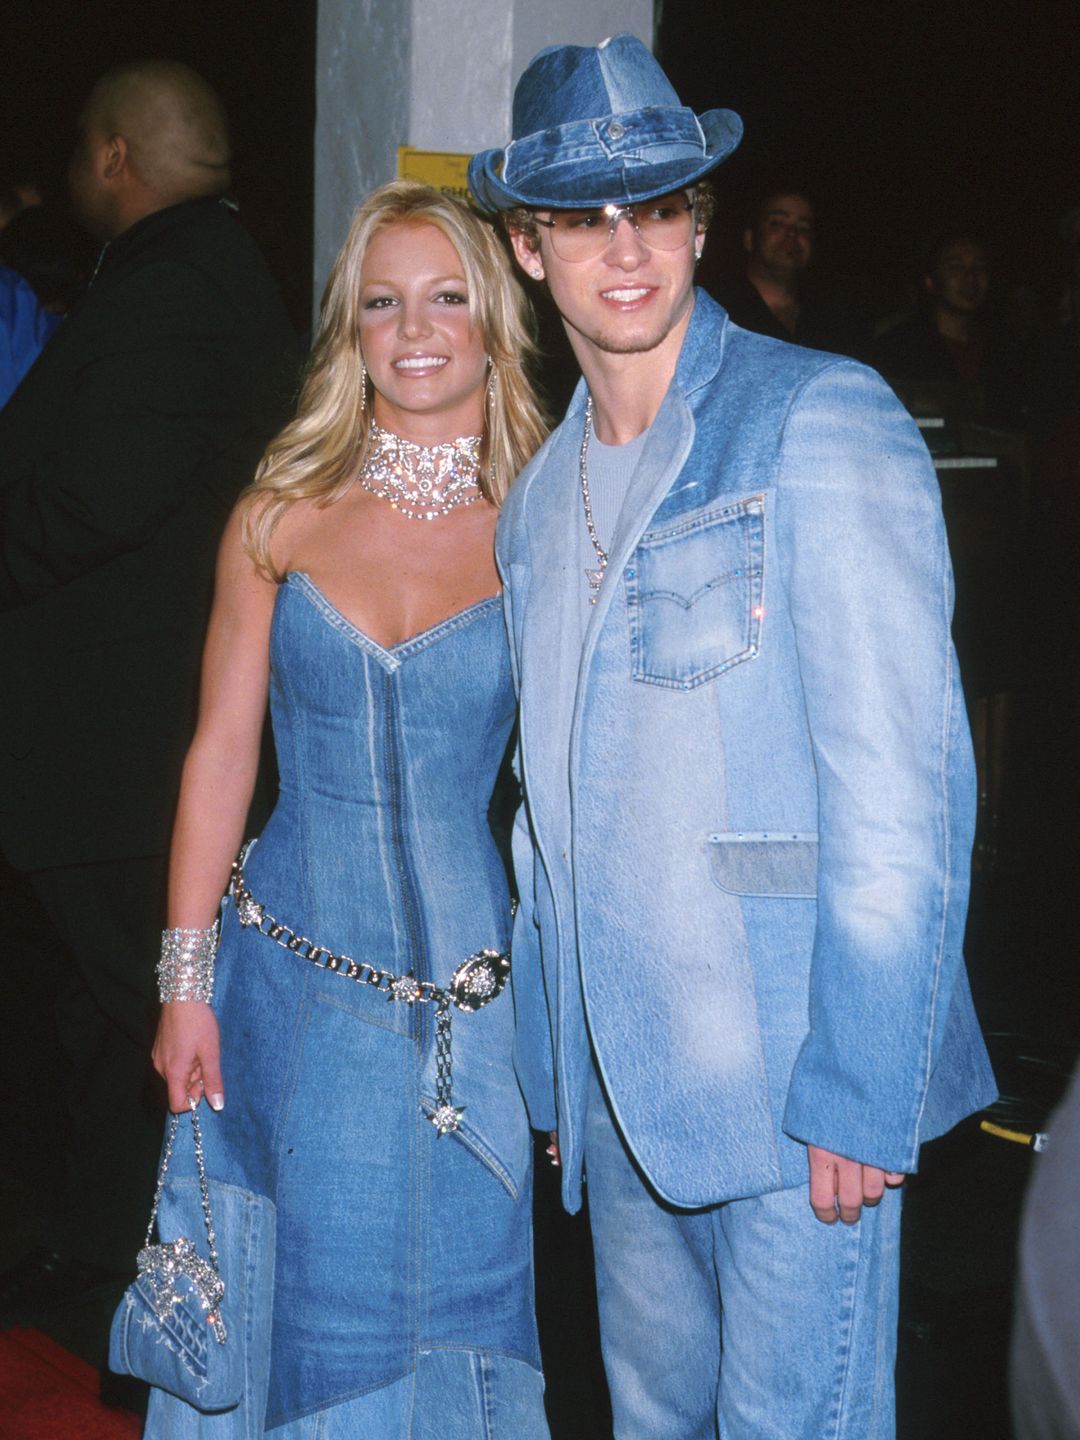 Britney Spears and Justin Timberlake wearing double denim